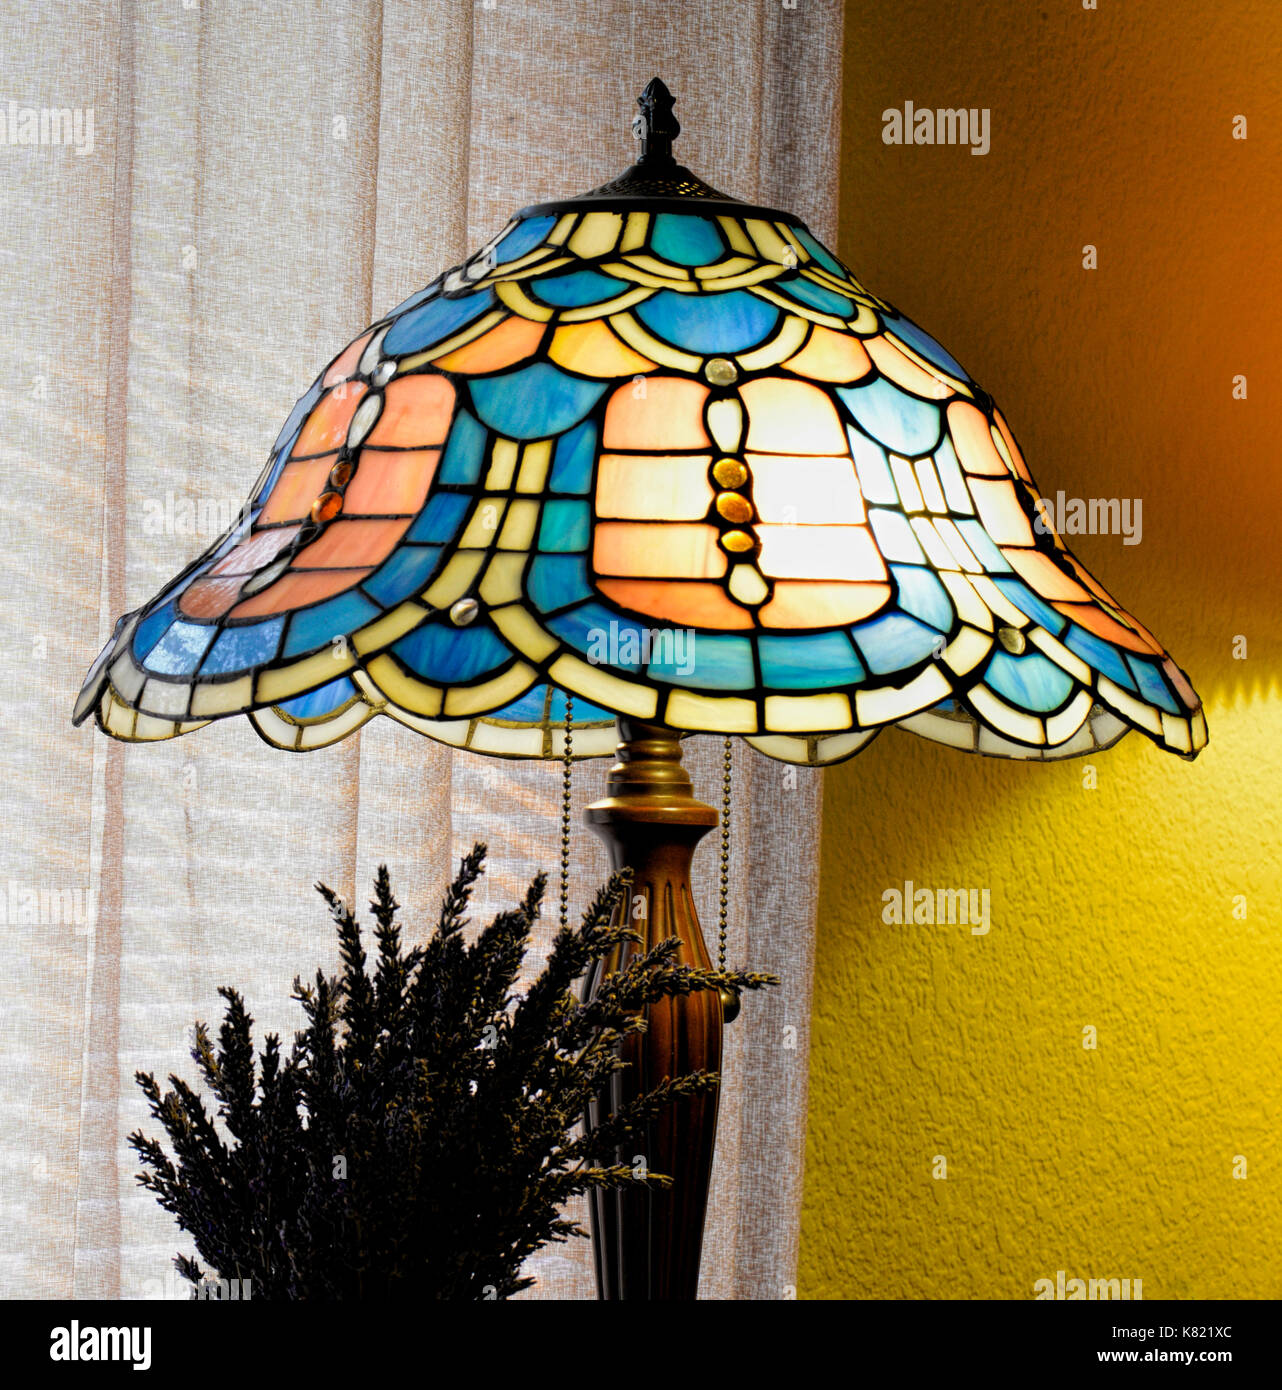 Tiffany Lamp High Resolution Stock Photography and Images - Alamy